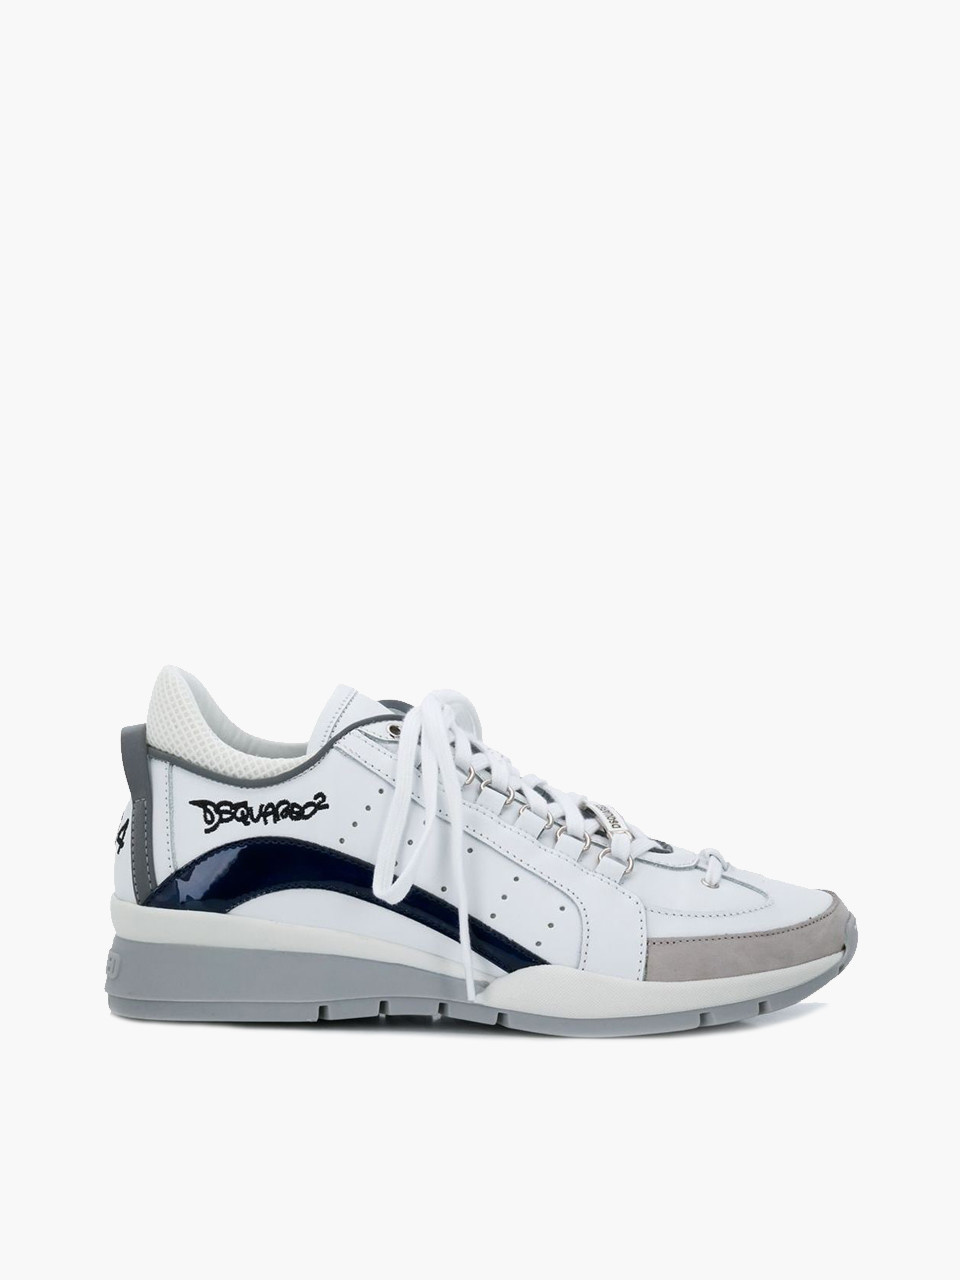 dsquared sneakers rotterdam